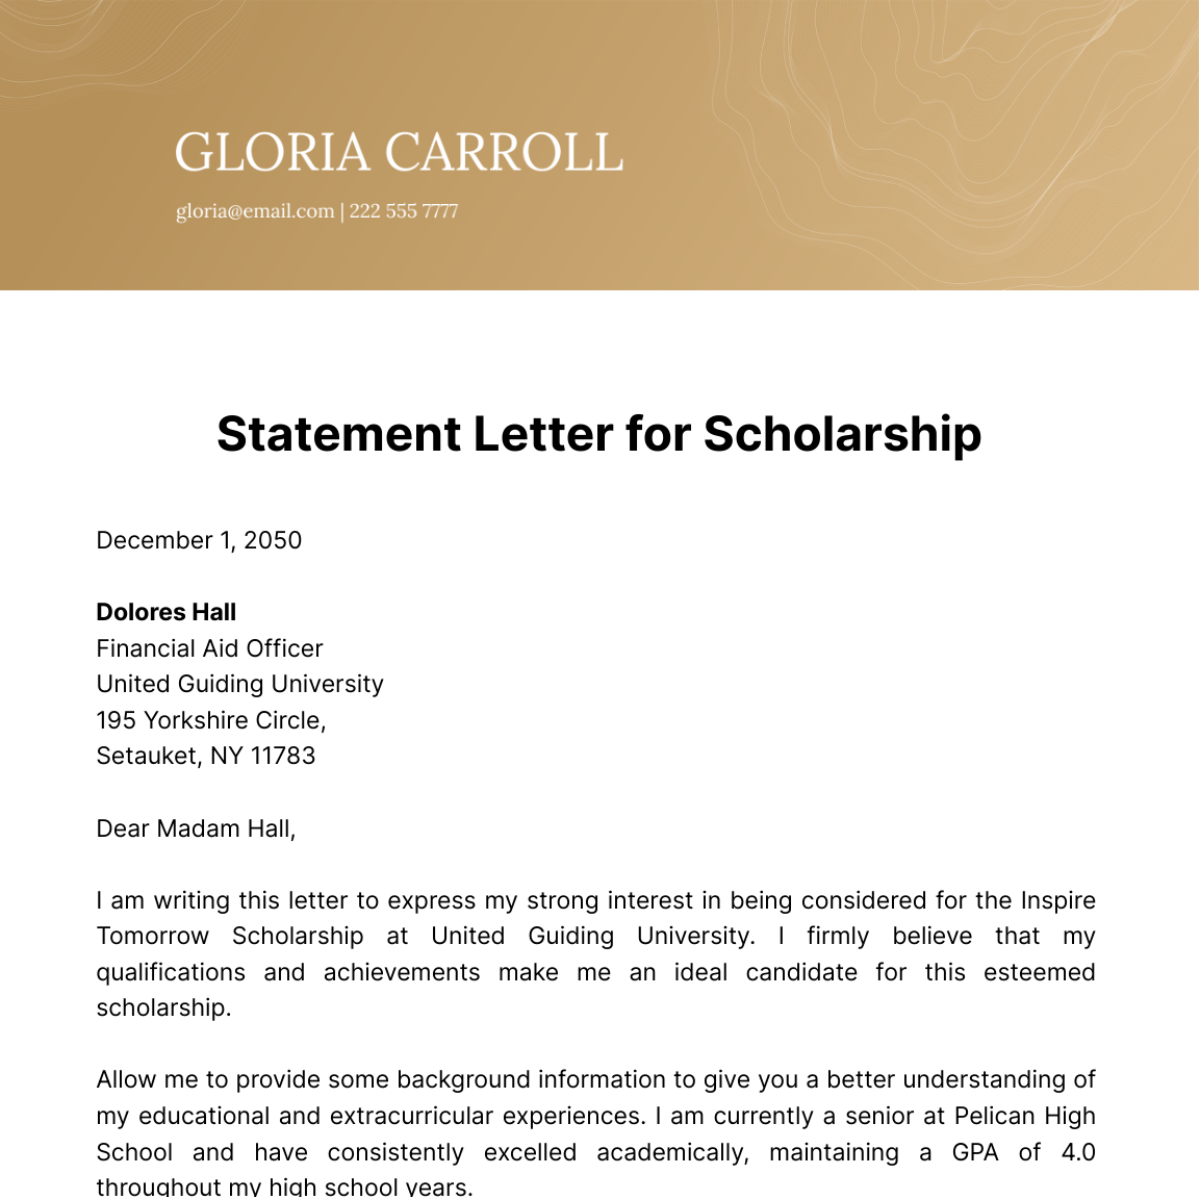 Statement Letter for Scholarship Template